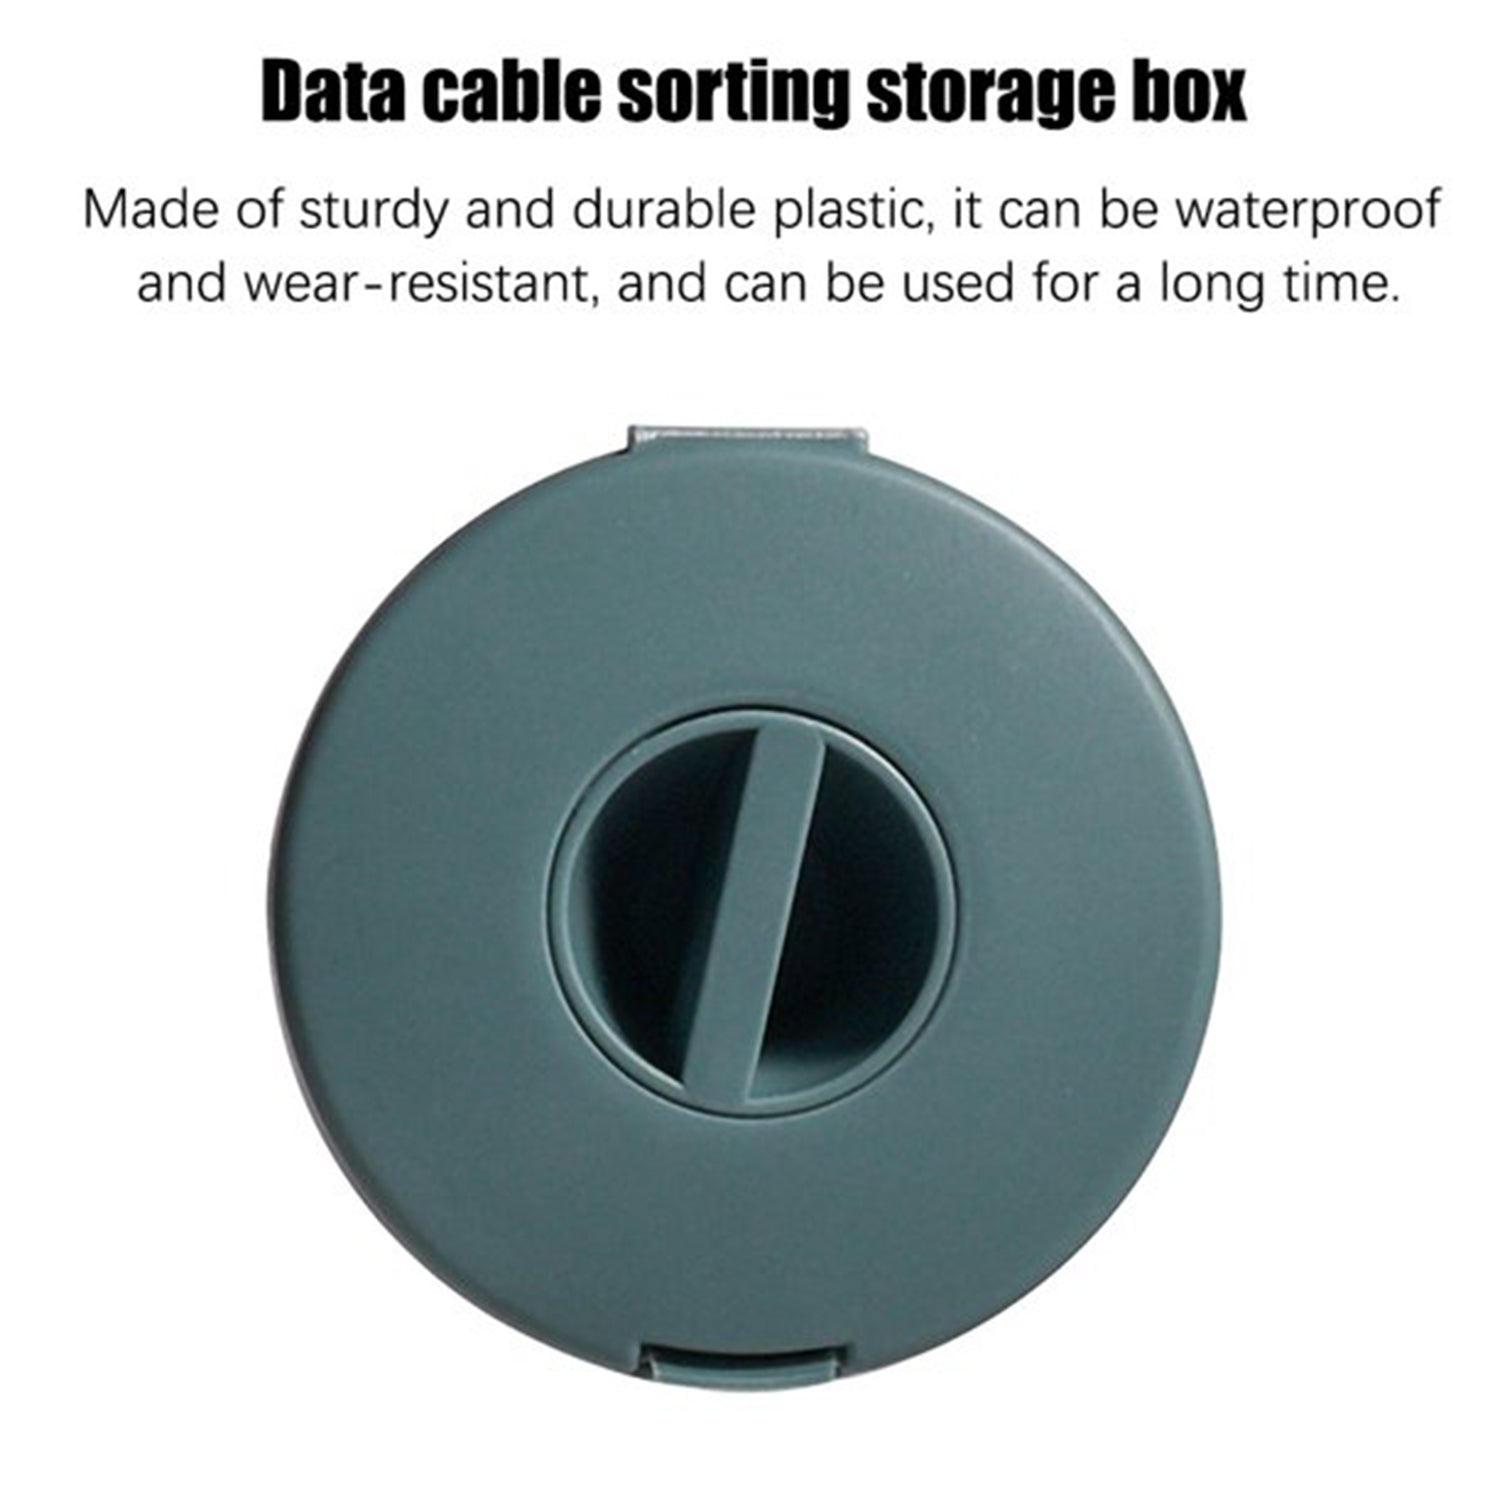 6155 cable storage Box widely used for storing and managing cable wires and all.